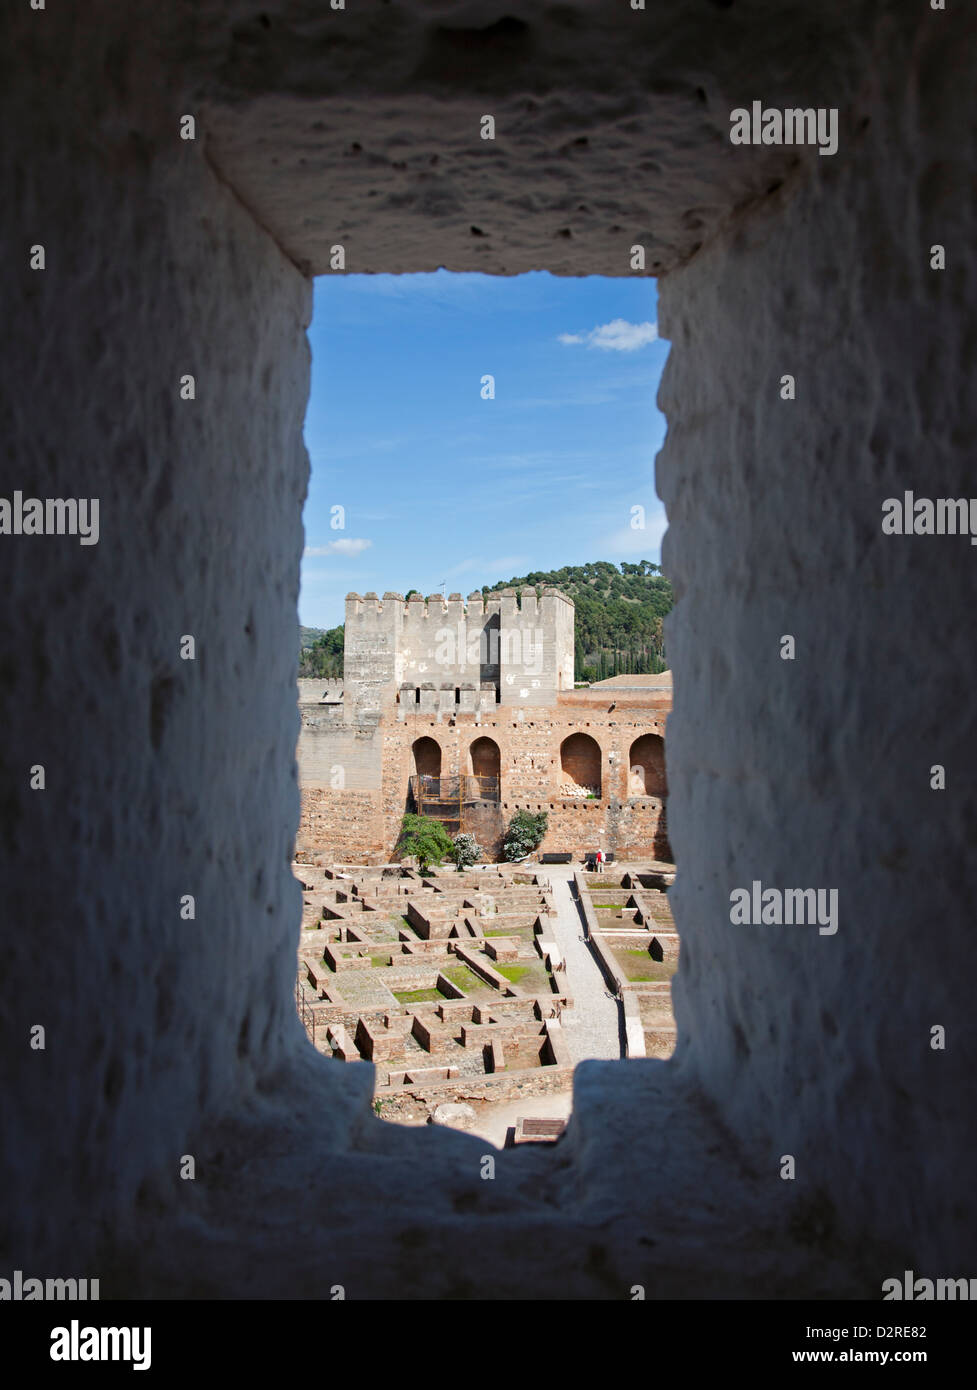 A view through a thickset window in the Torre de la Vela of the old Alcazaba in the Alhambra complex at Granada Andalucia Spain Stock Photo